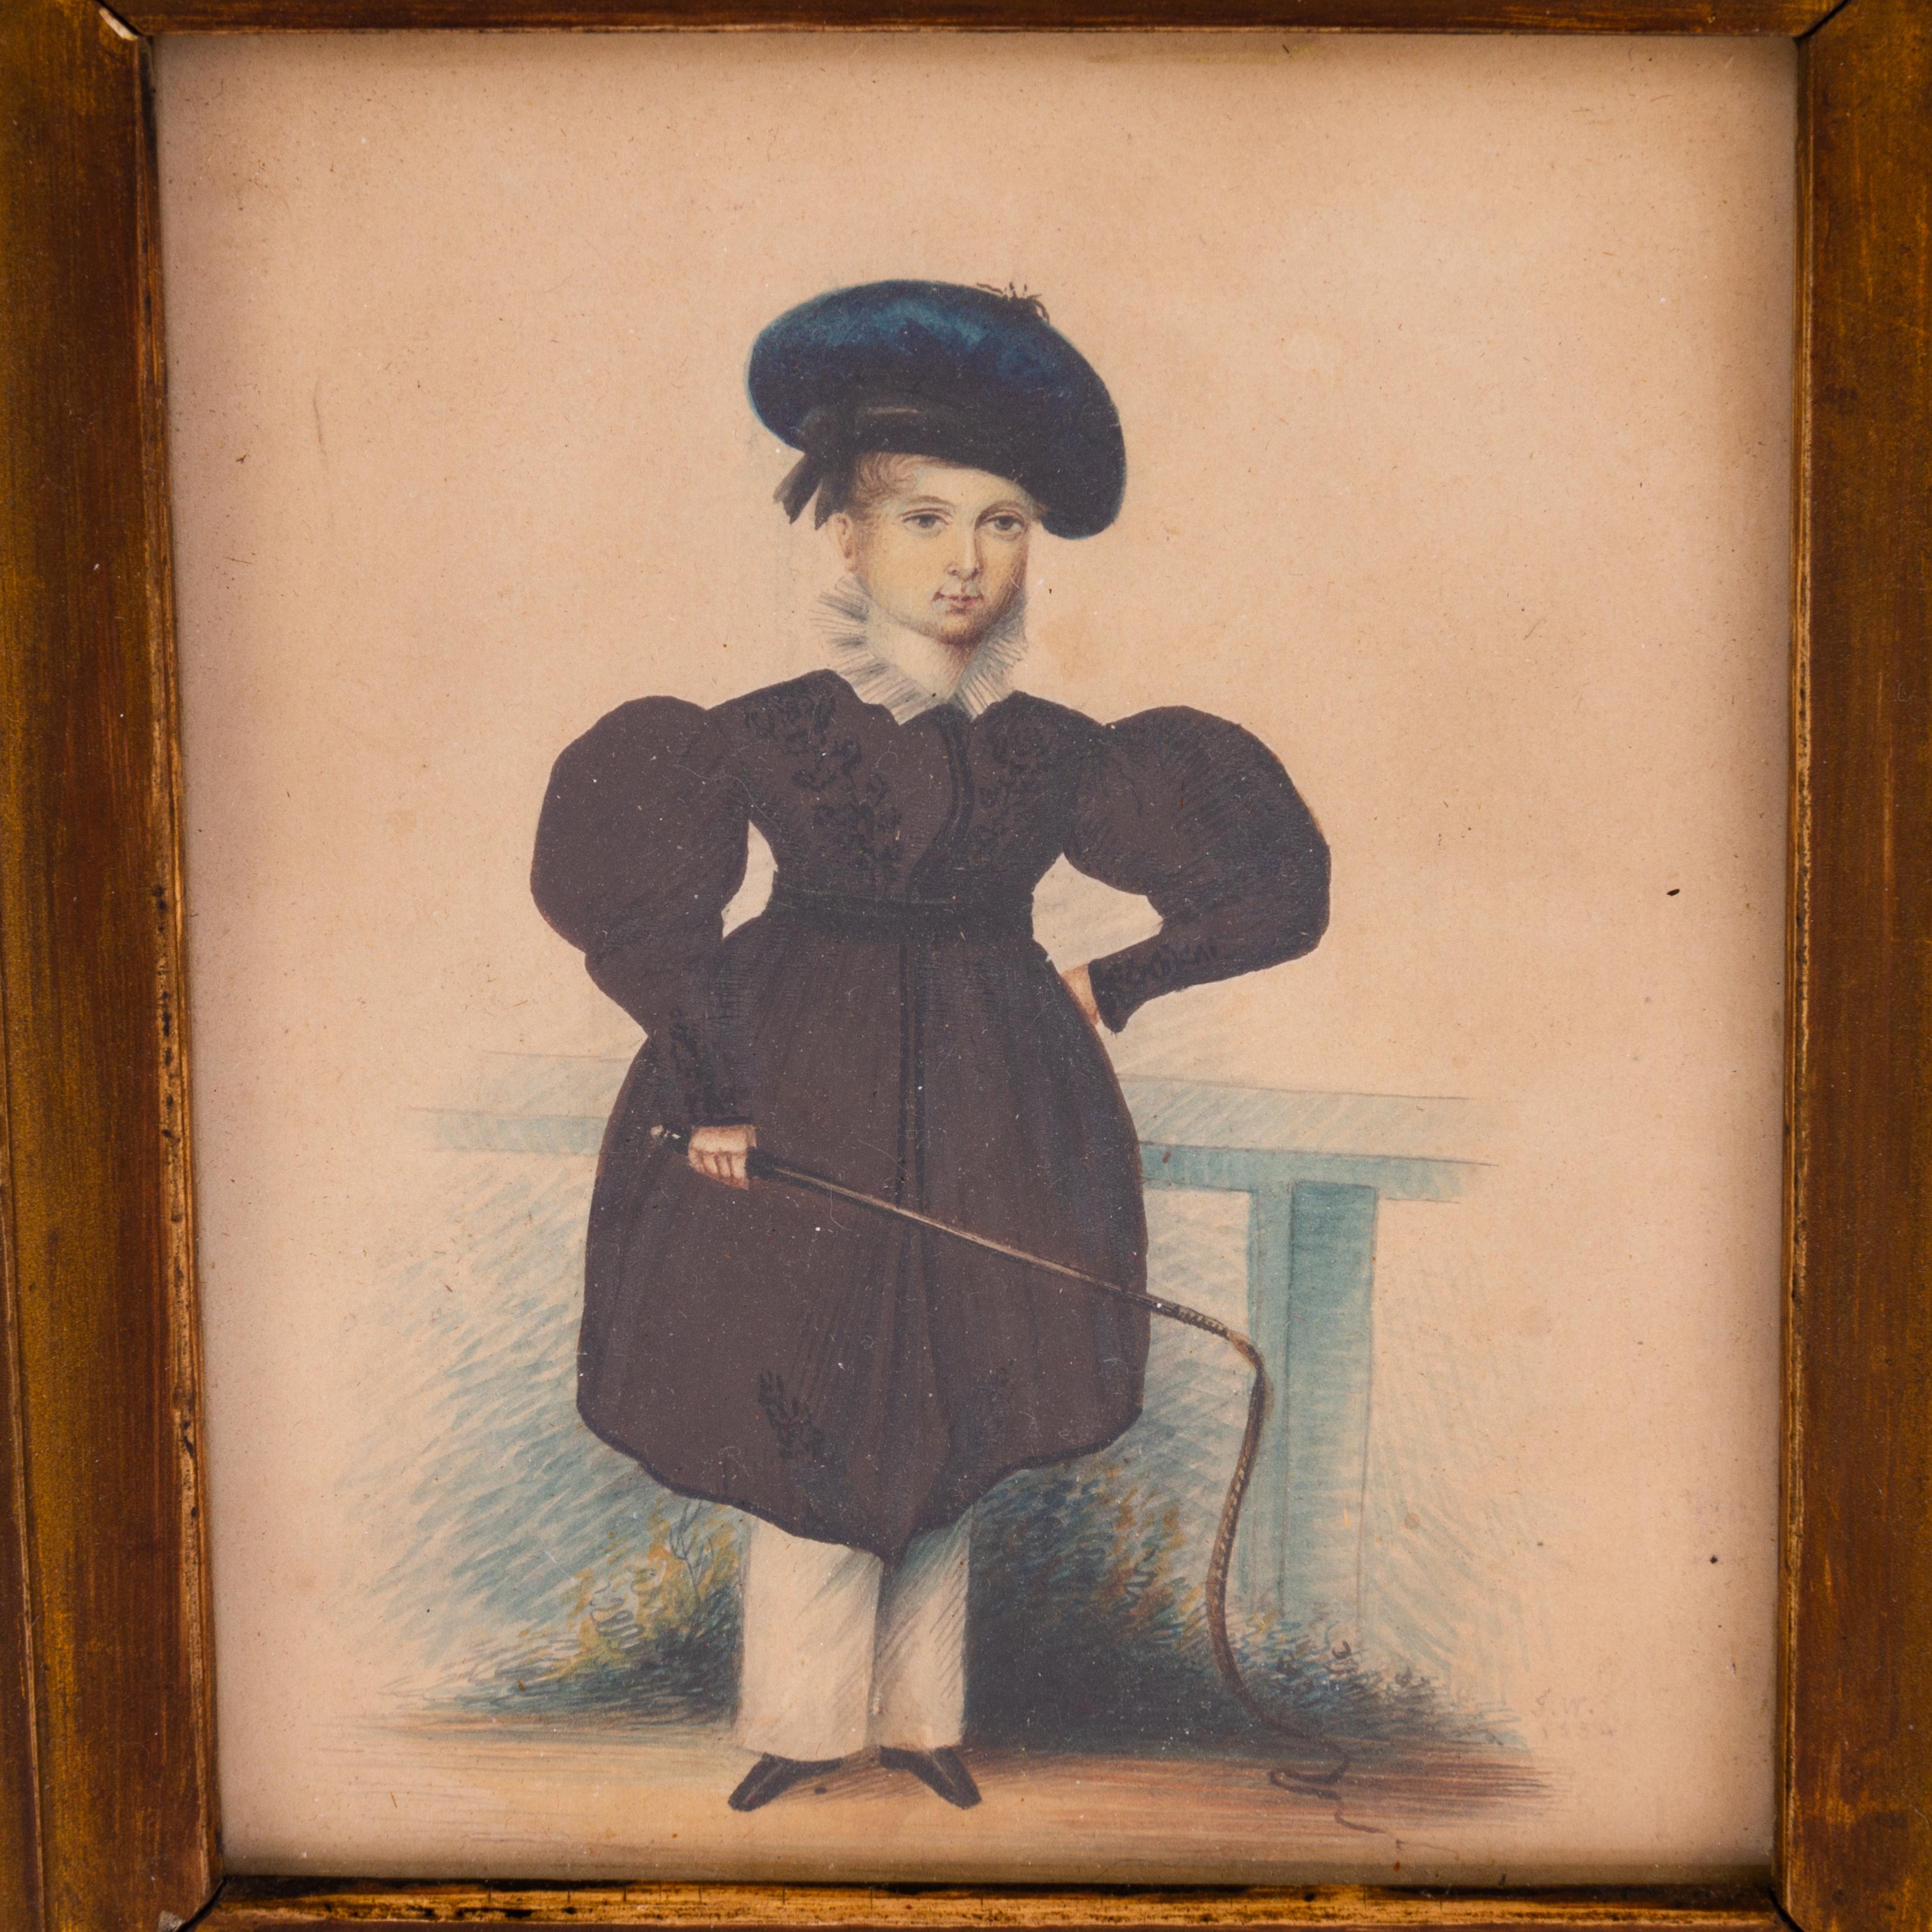 Victorian English Equestrian Lithograph Child with Whip 19th Century
Good condition, framed.
From a private collection.
Free international shipping.